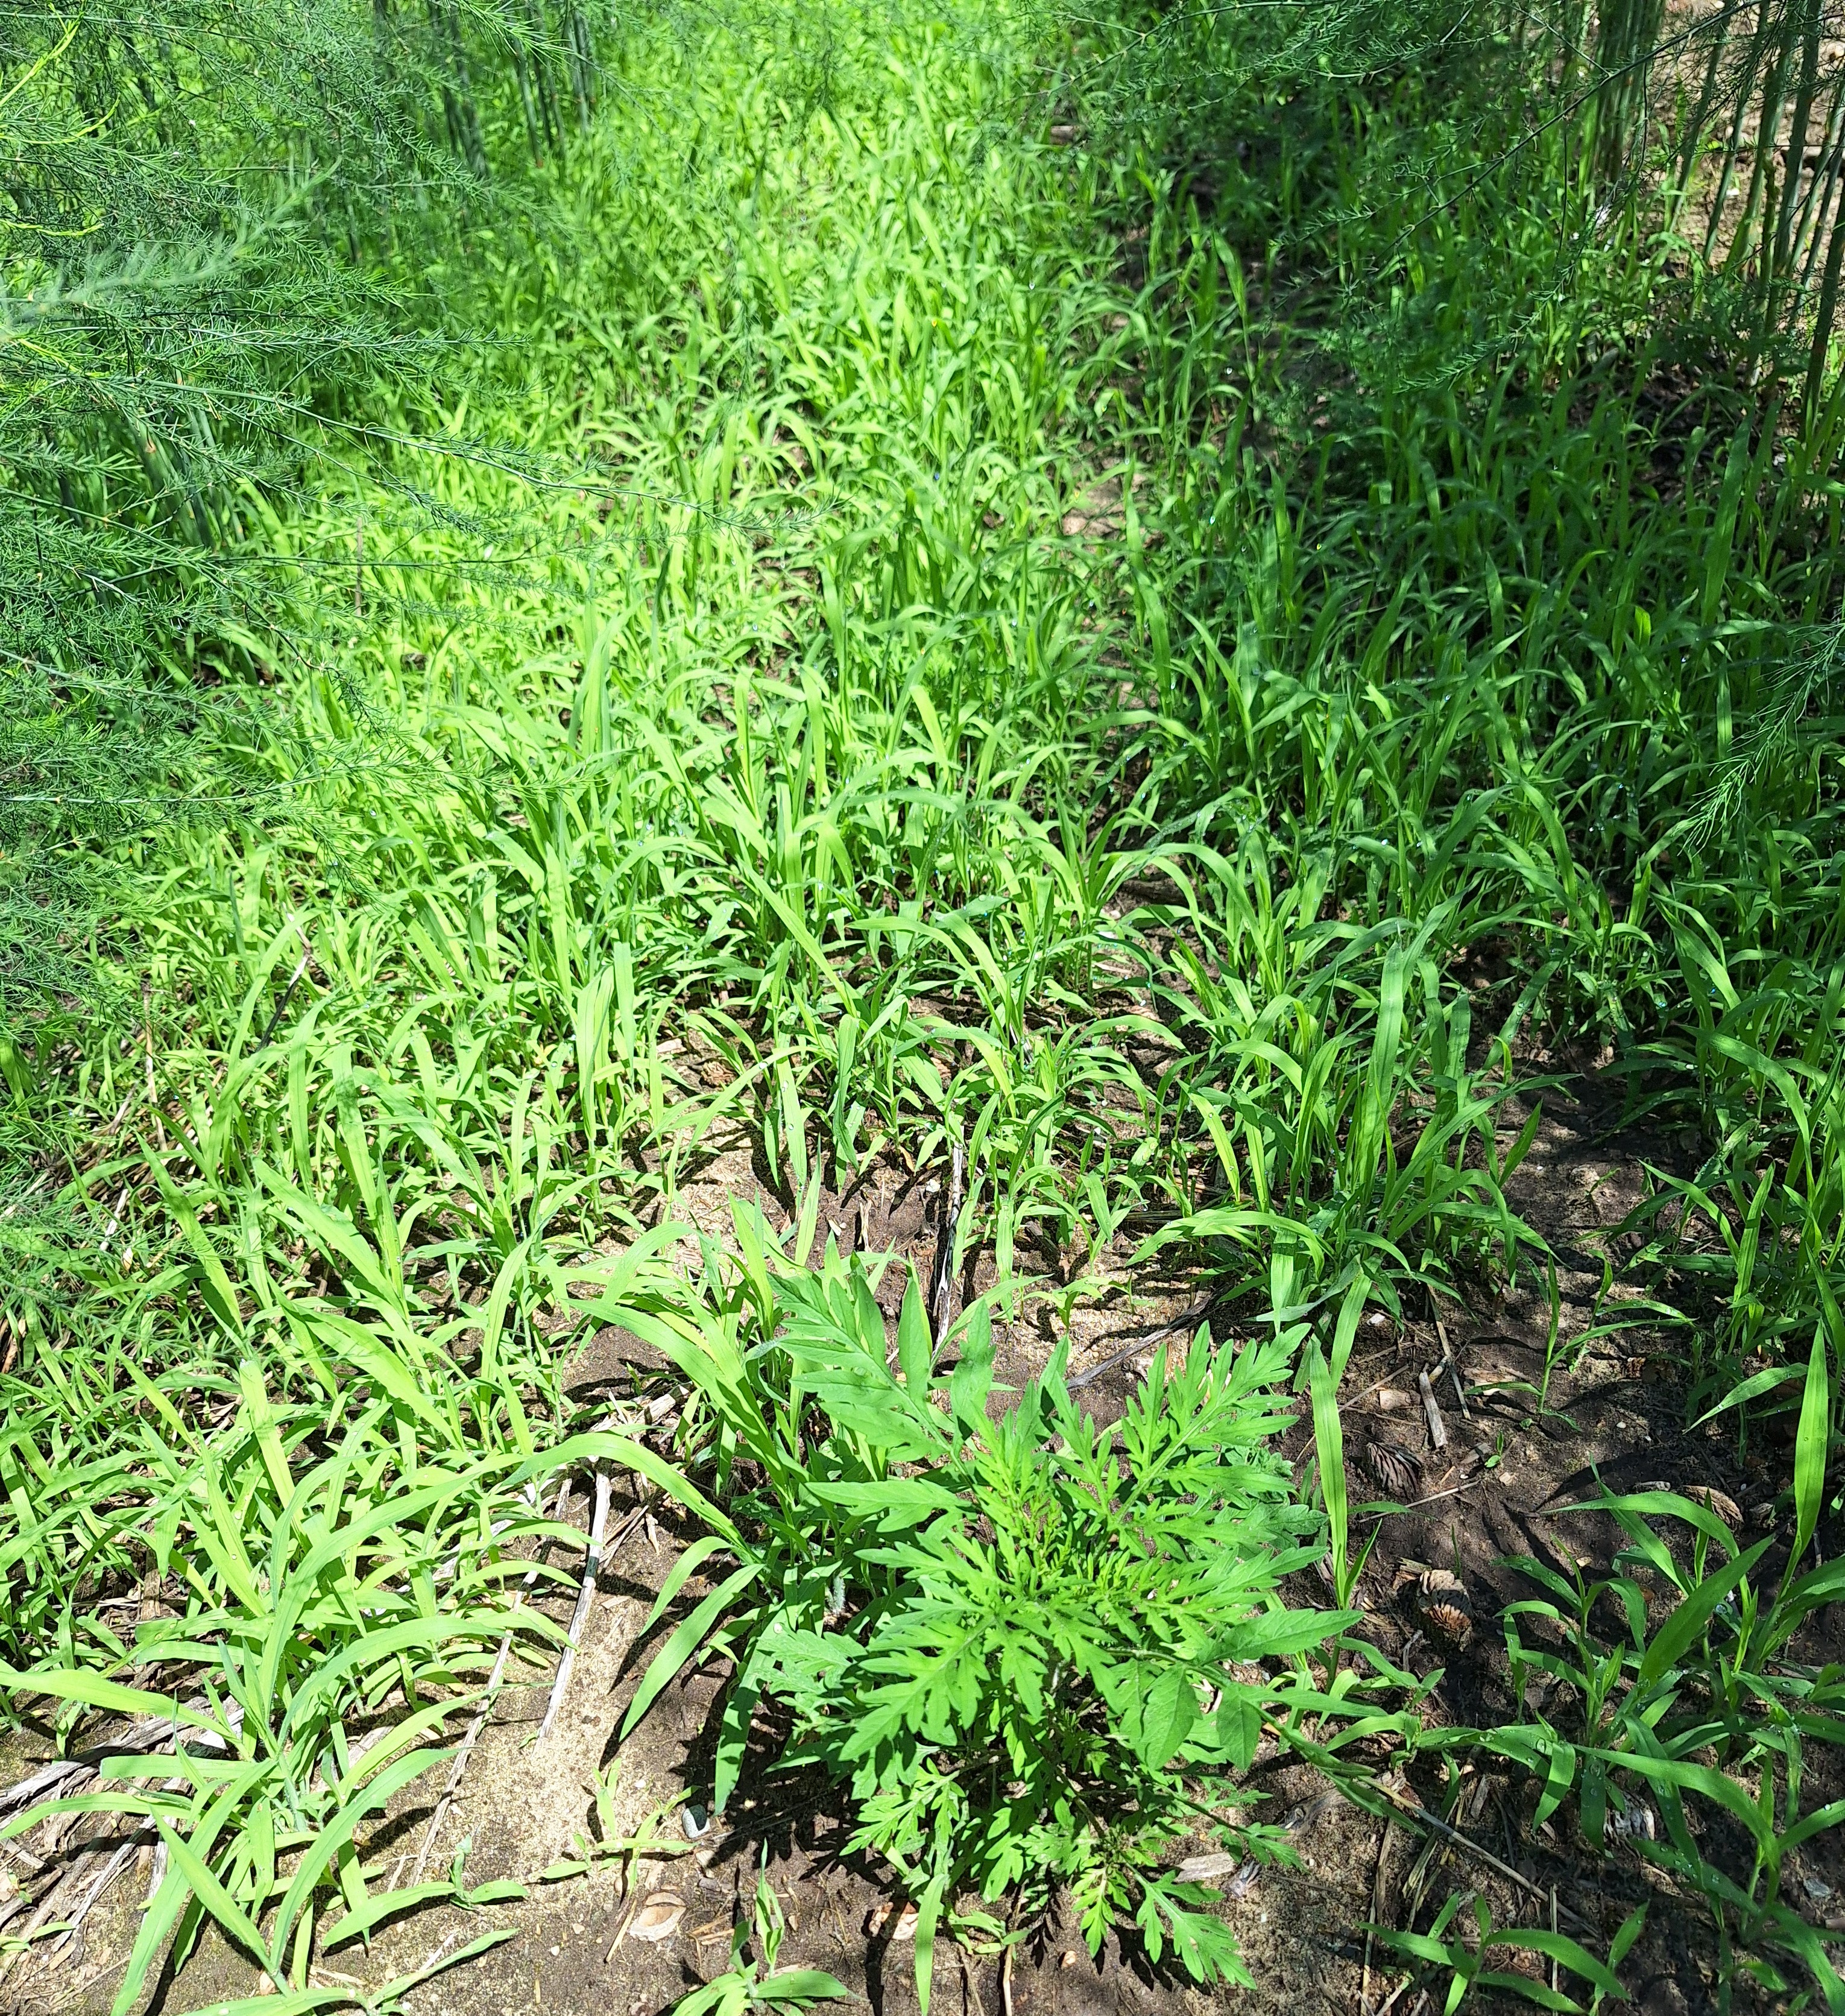 Crabgrass growing in asparagus field.